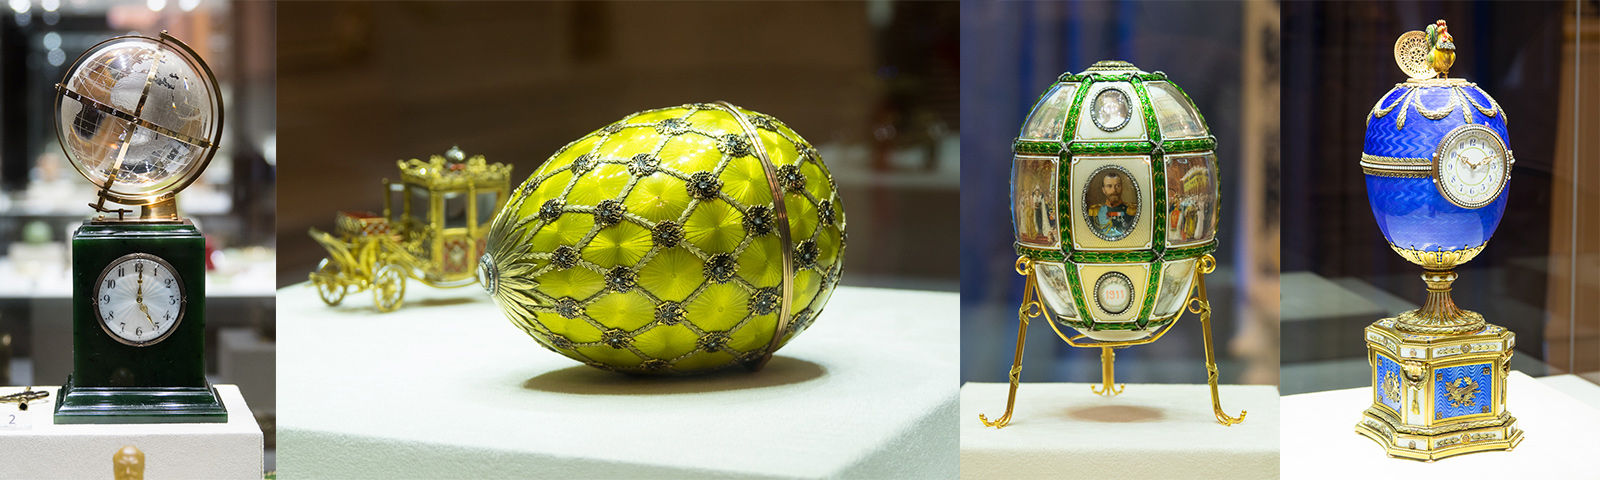 photo collage about museum Faberge